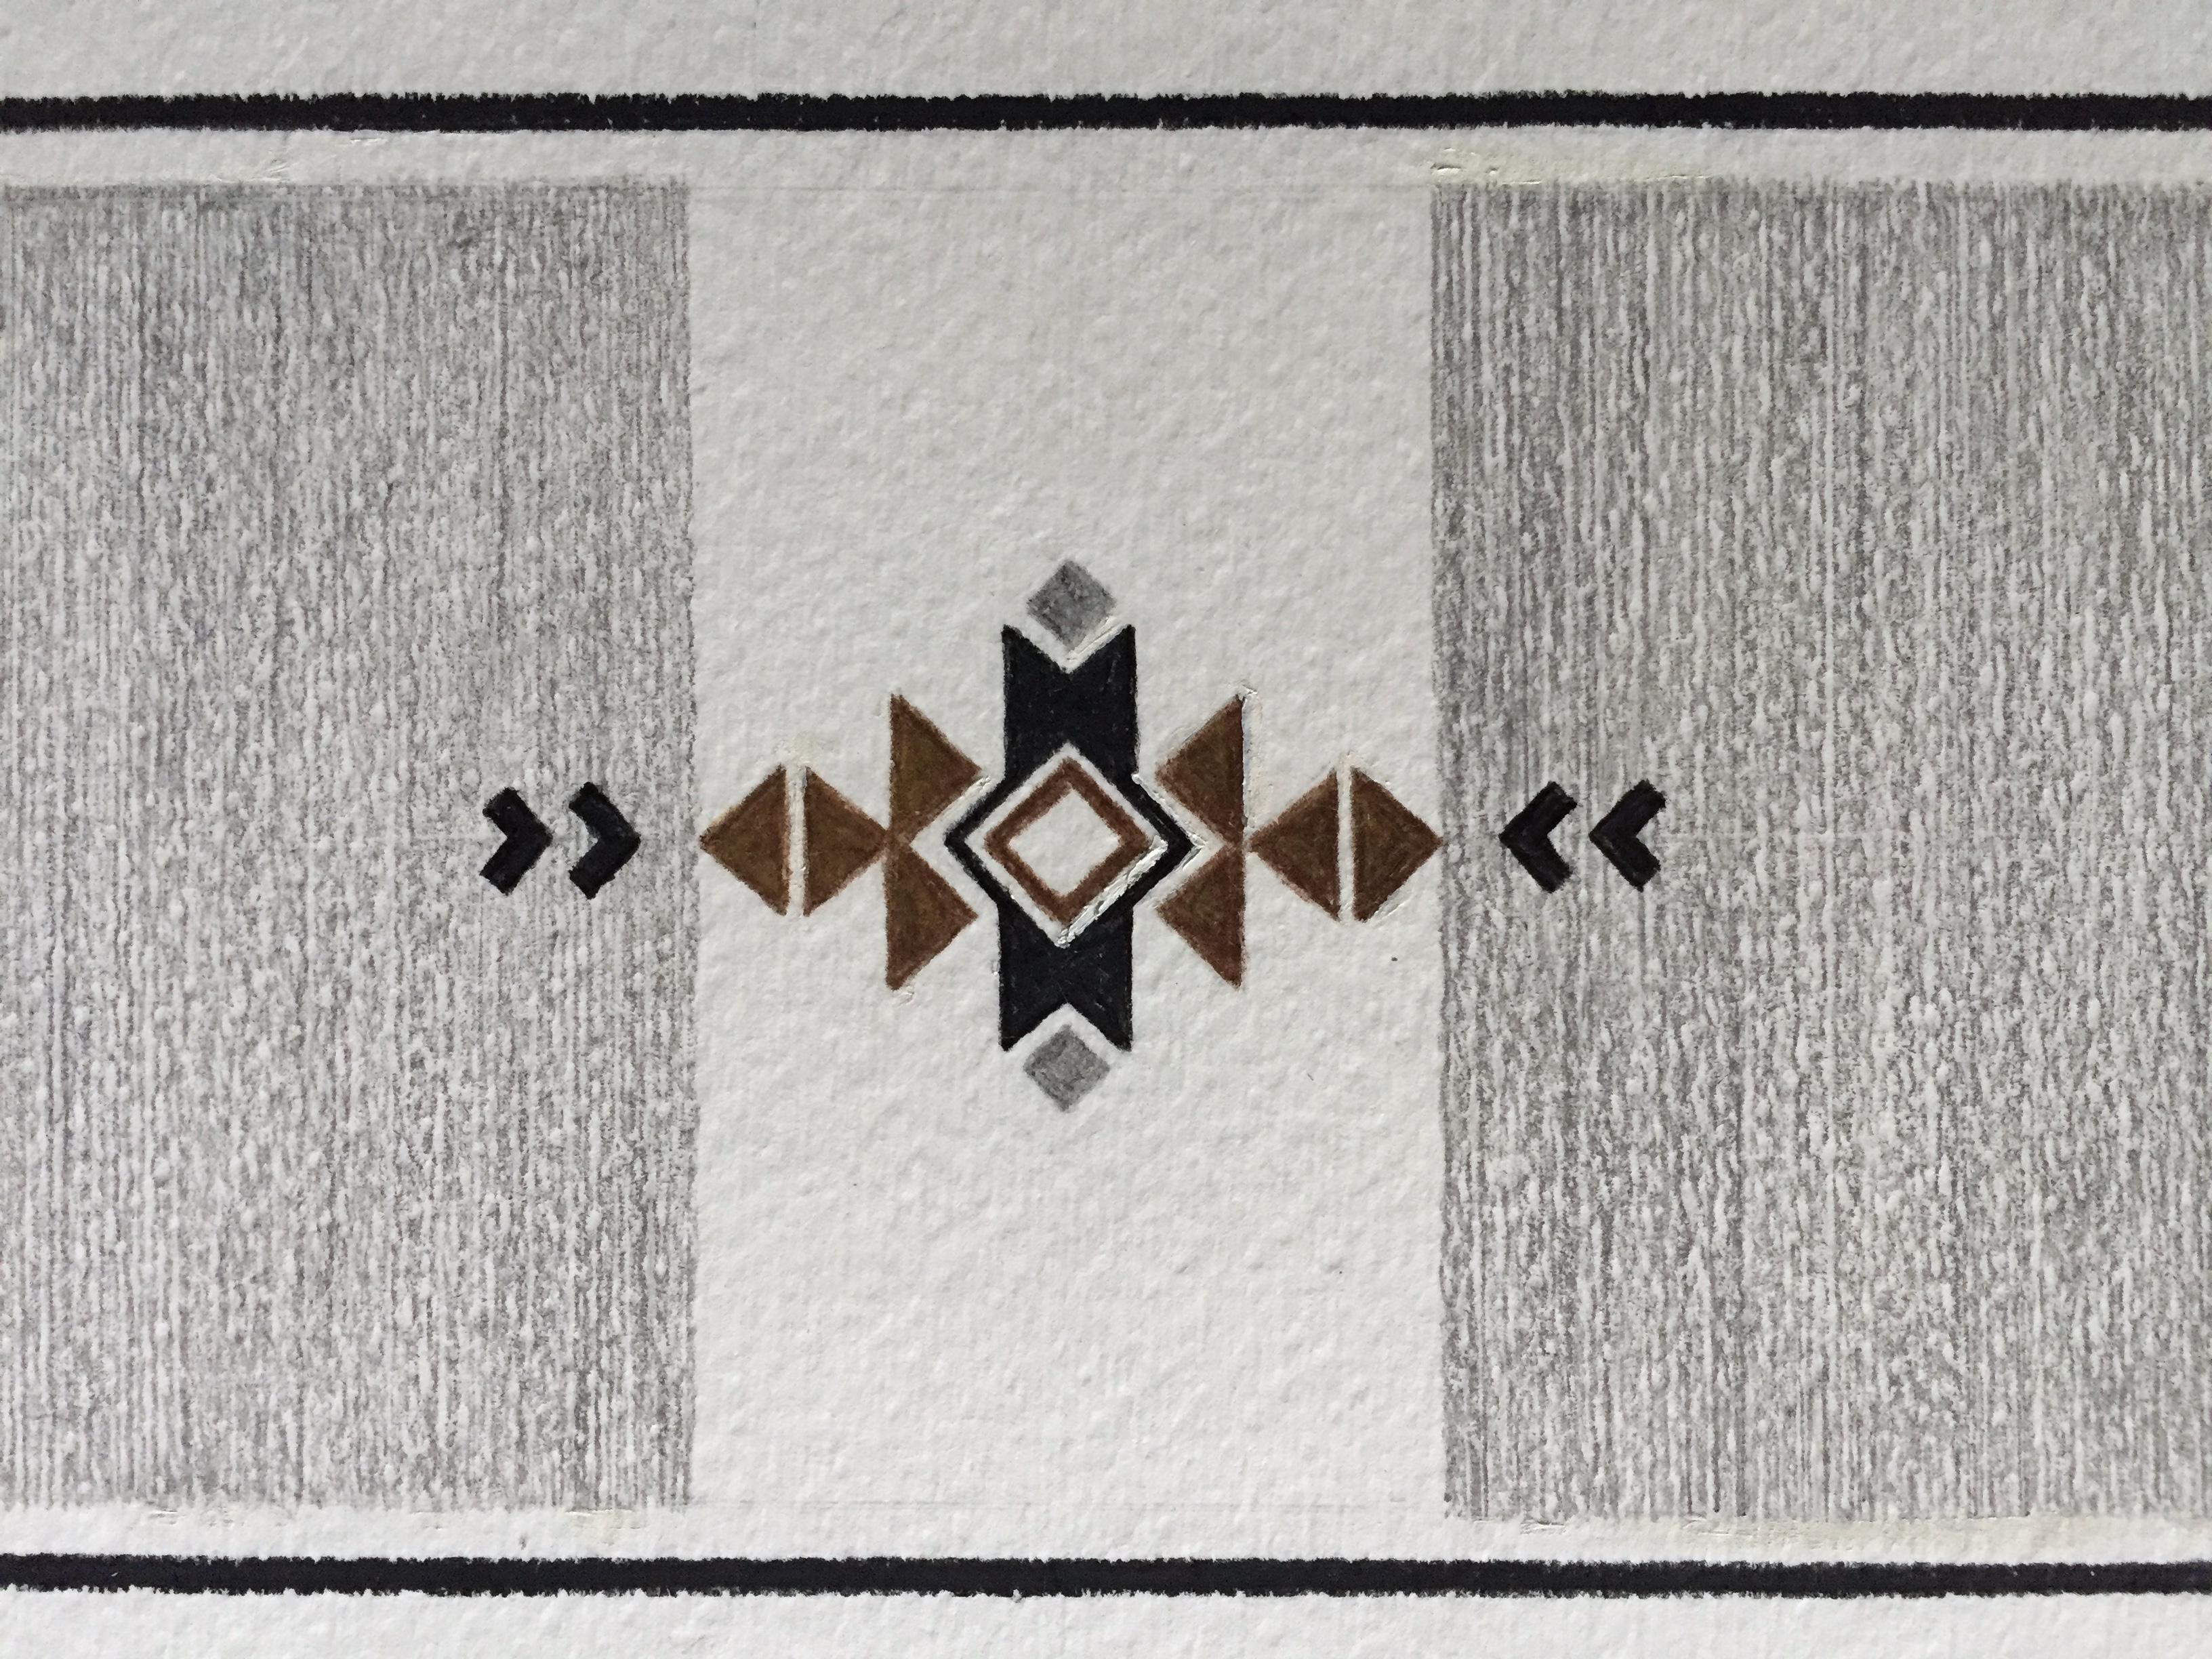 This detailed artwork on paper puts emphasis on design and composition. A navajo inspired pattern is created using traditional design elements. The high contrasting, geometric pattern makes for an engaging rug motif with a minimal yet strong